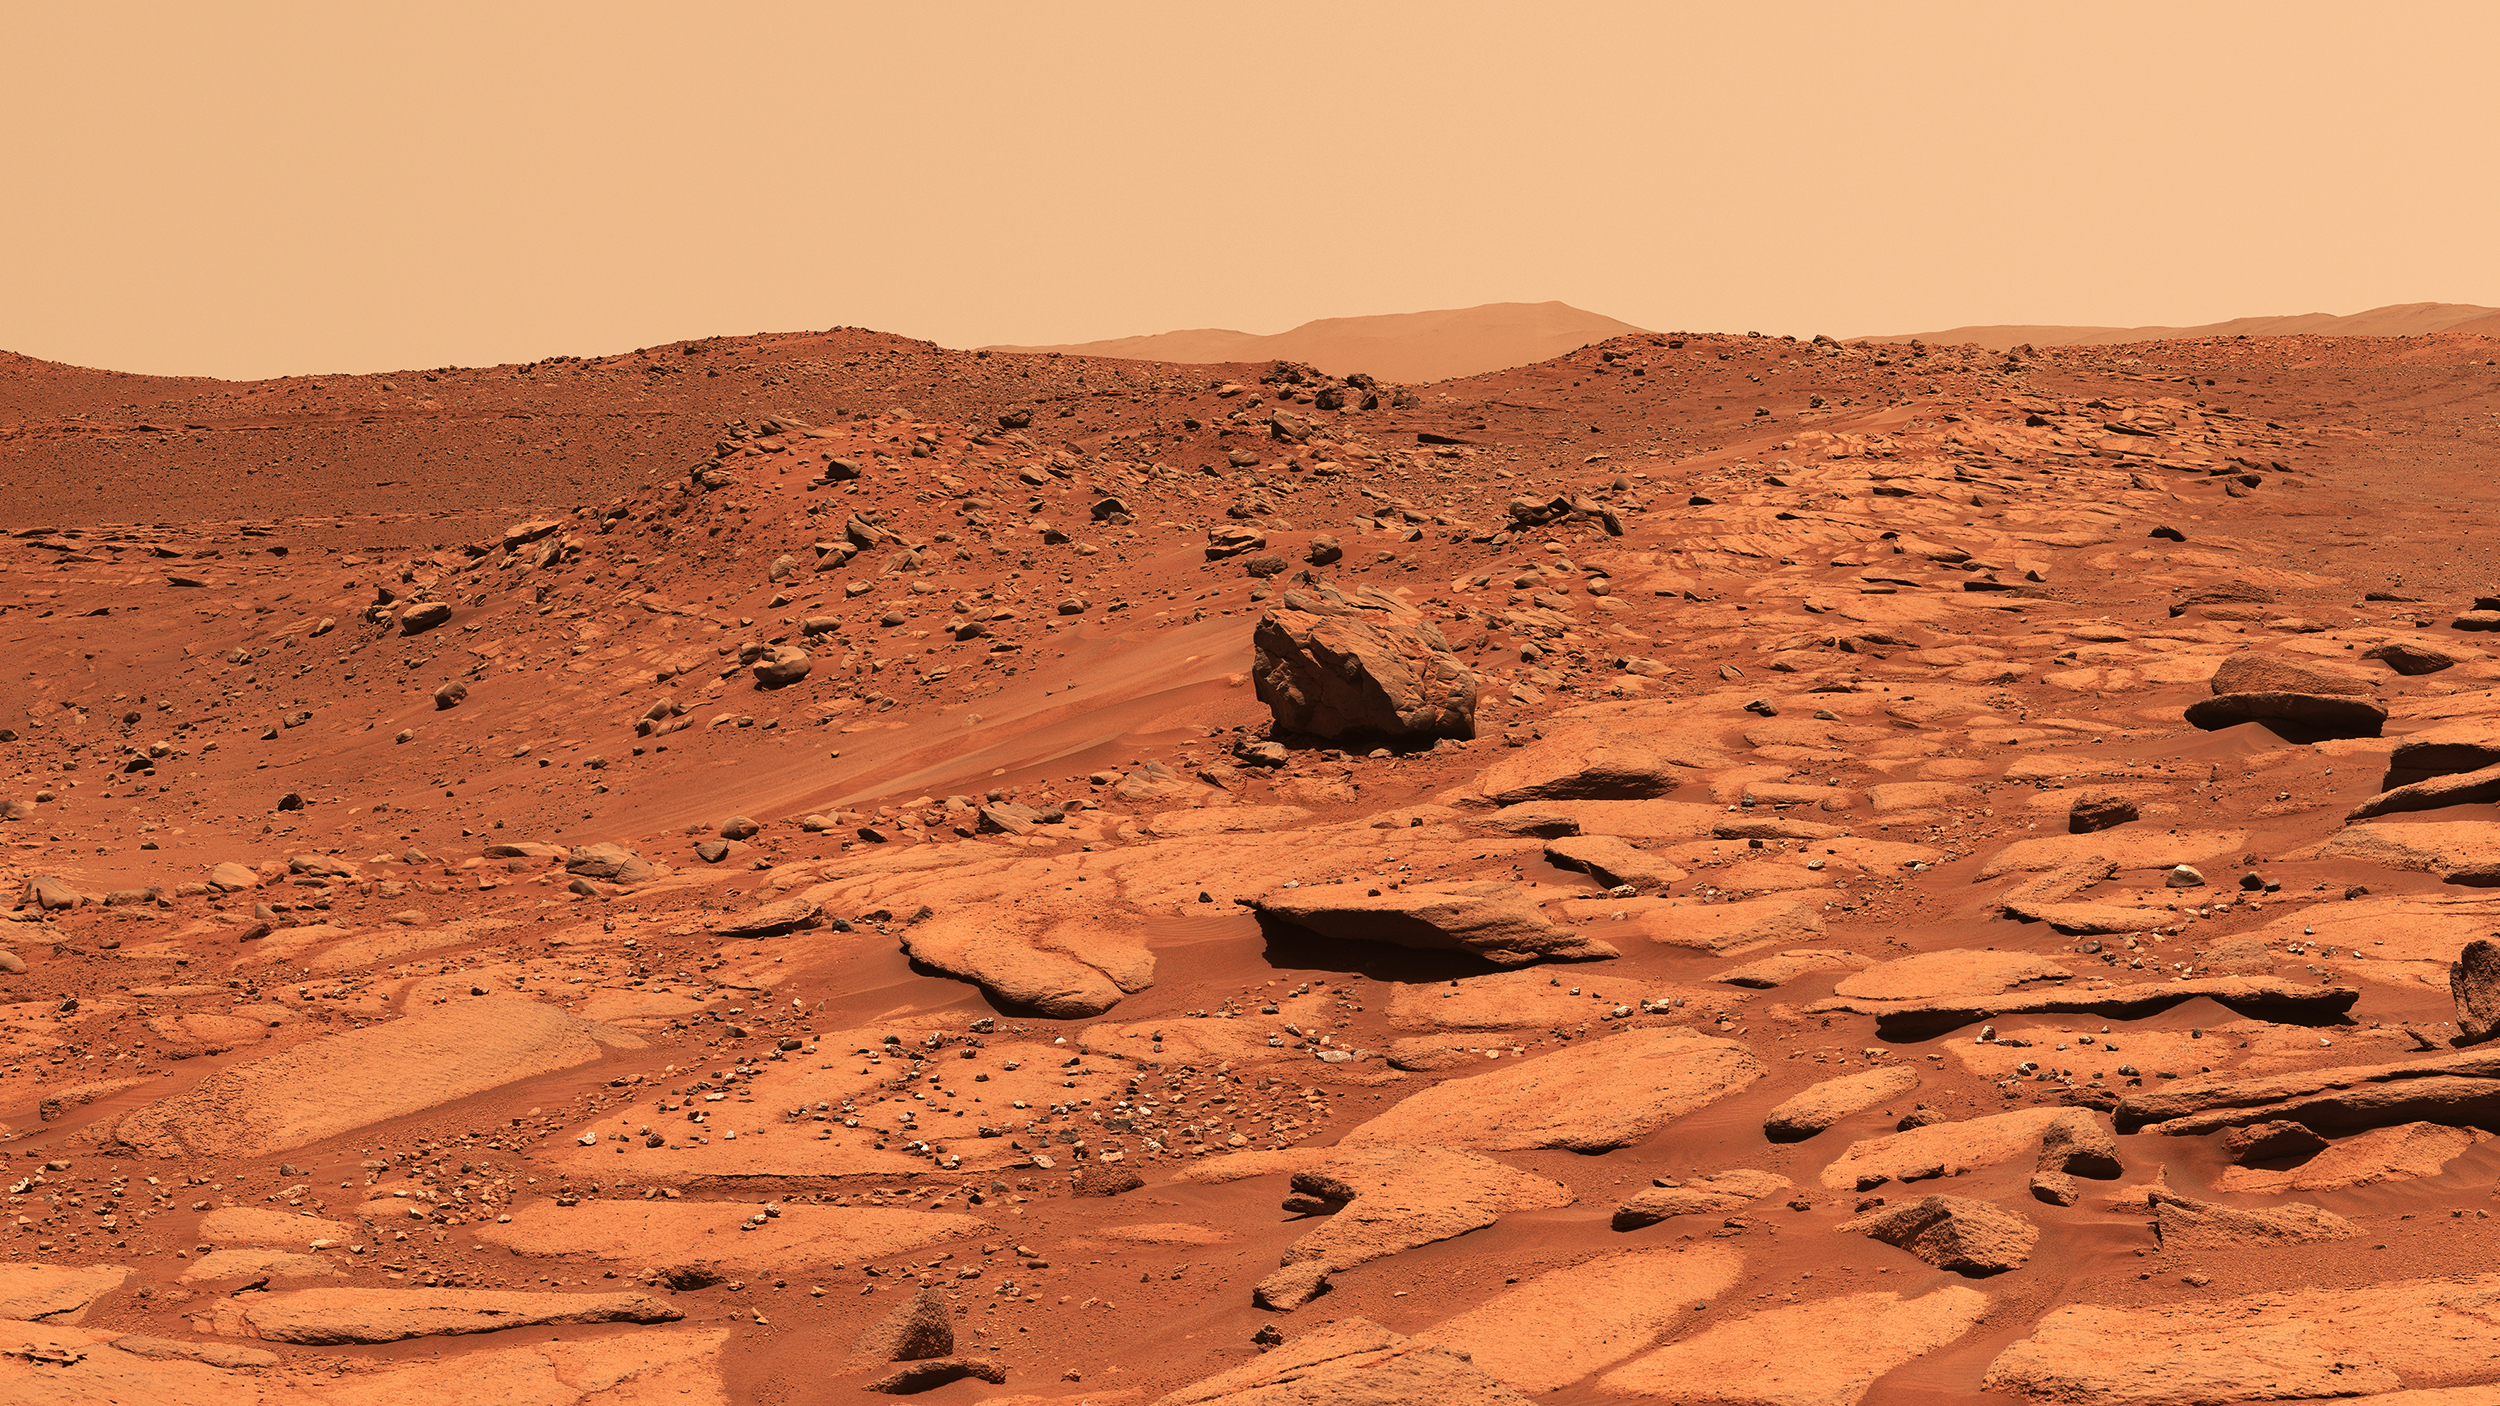 An image of the Martian surface.